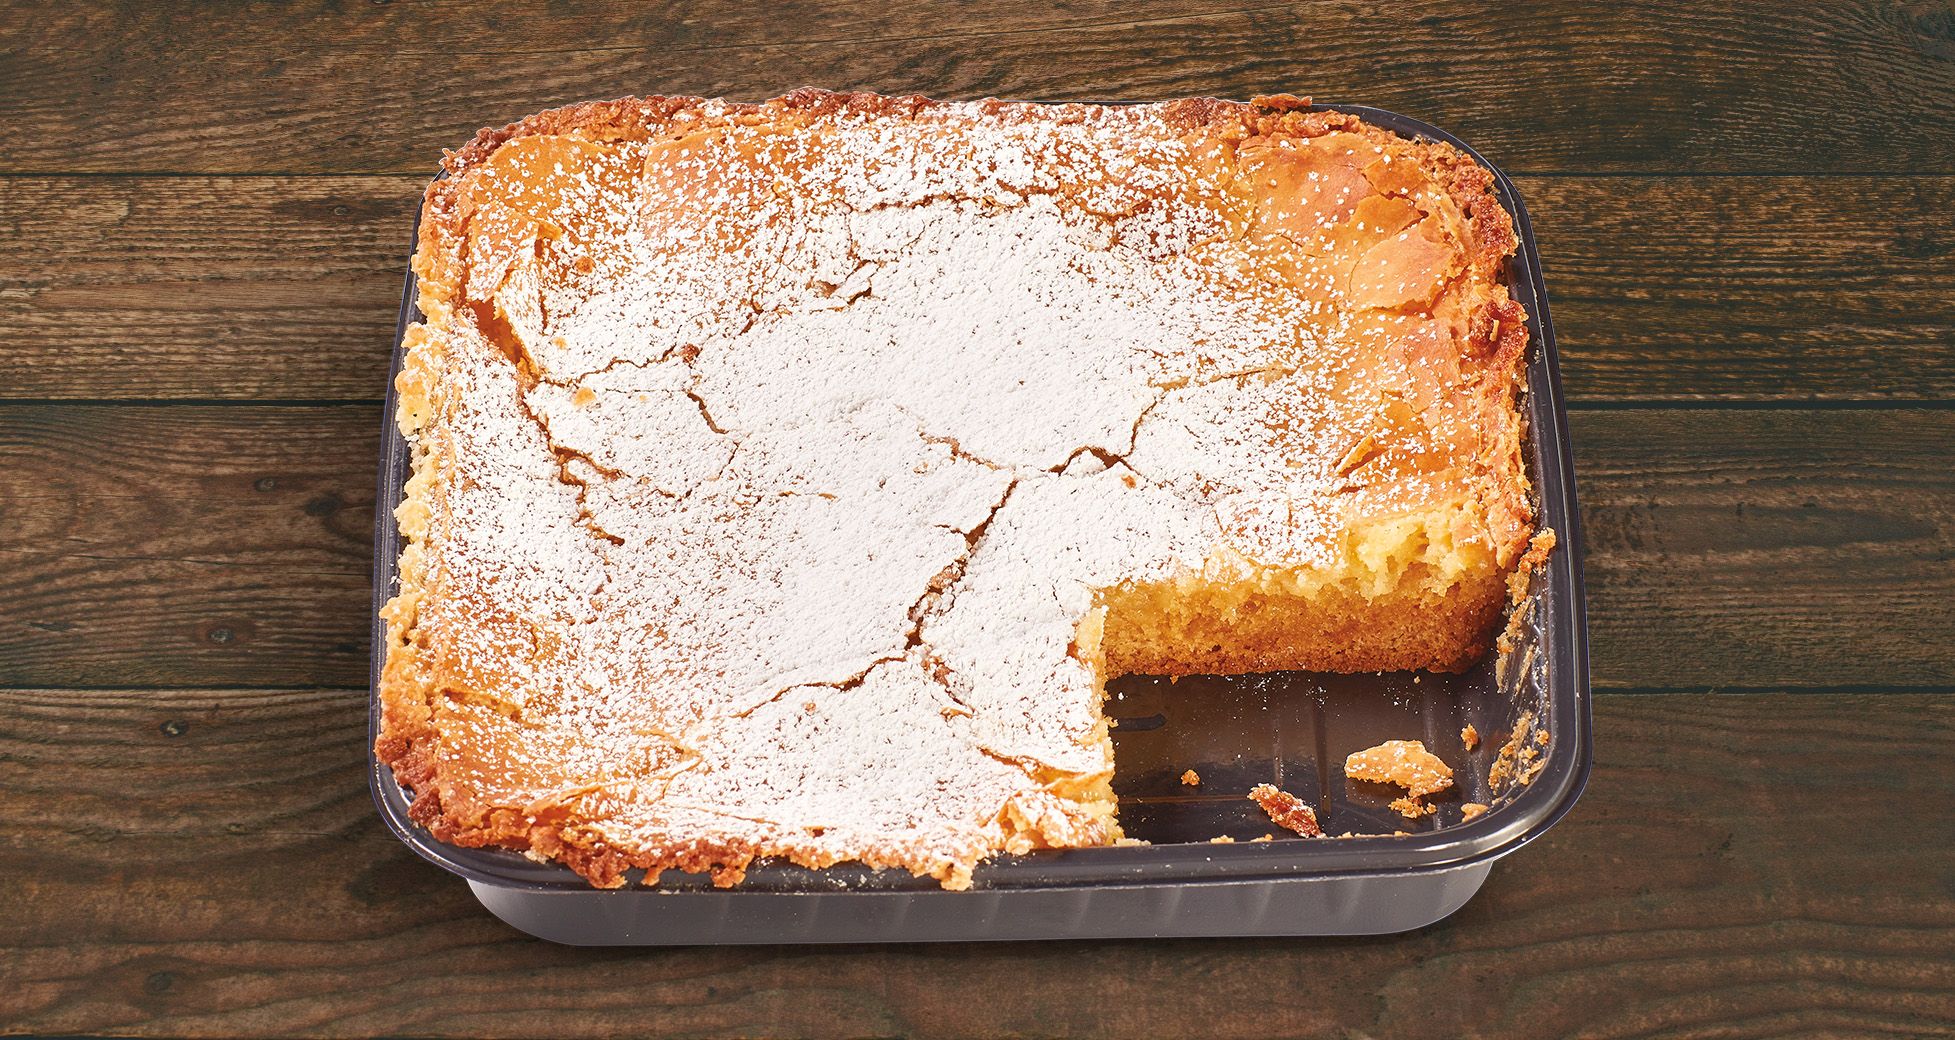 National Gooey Butter Cake Day